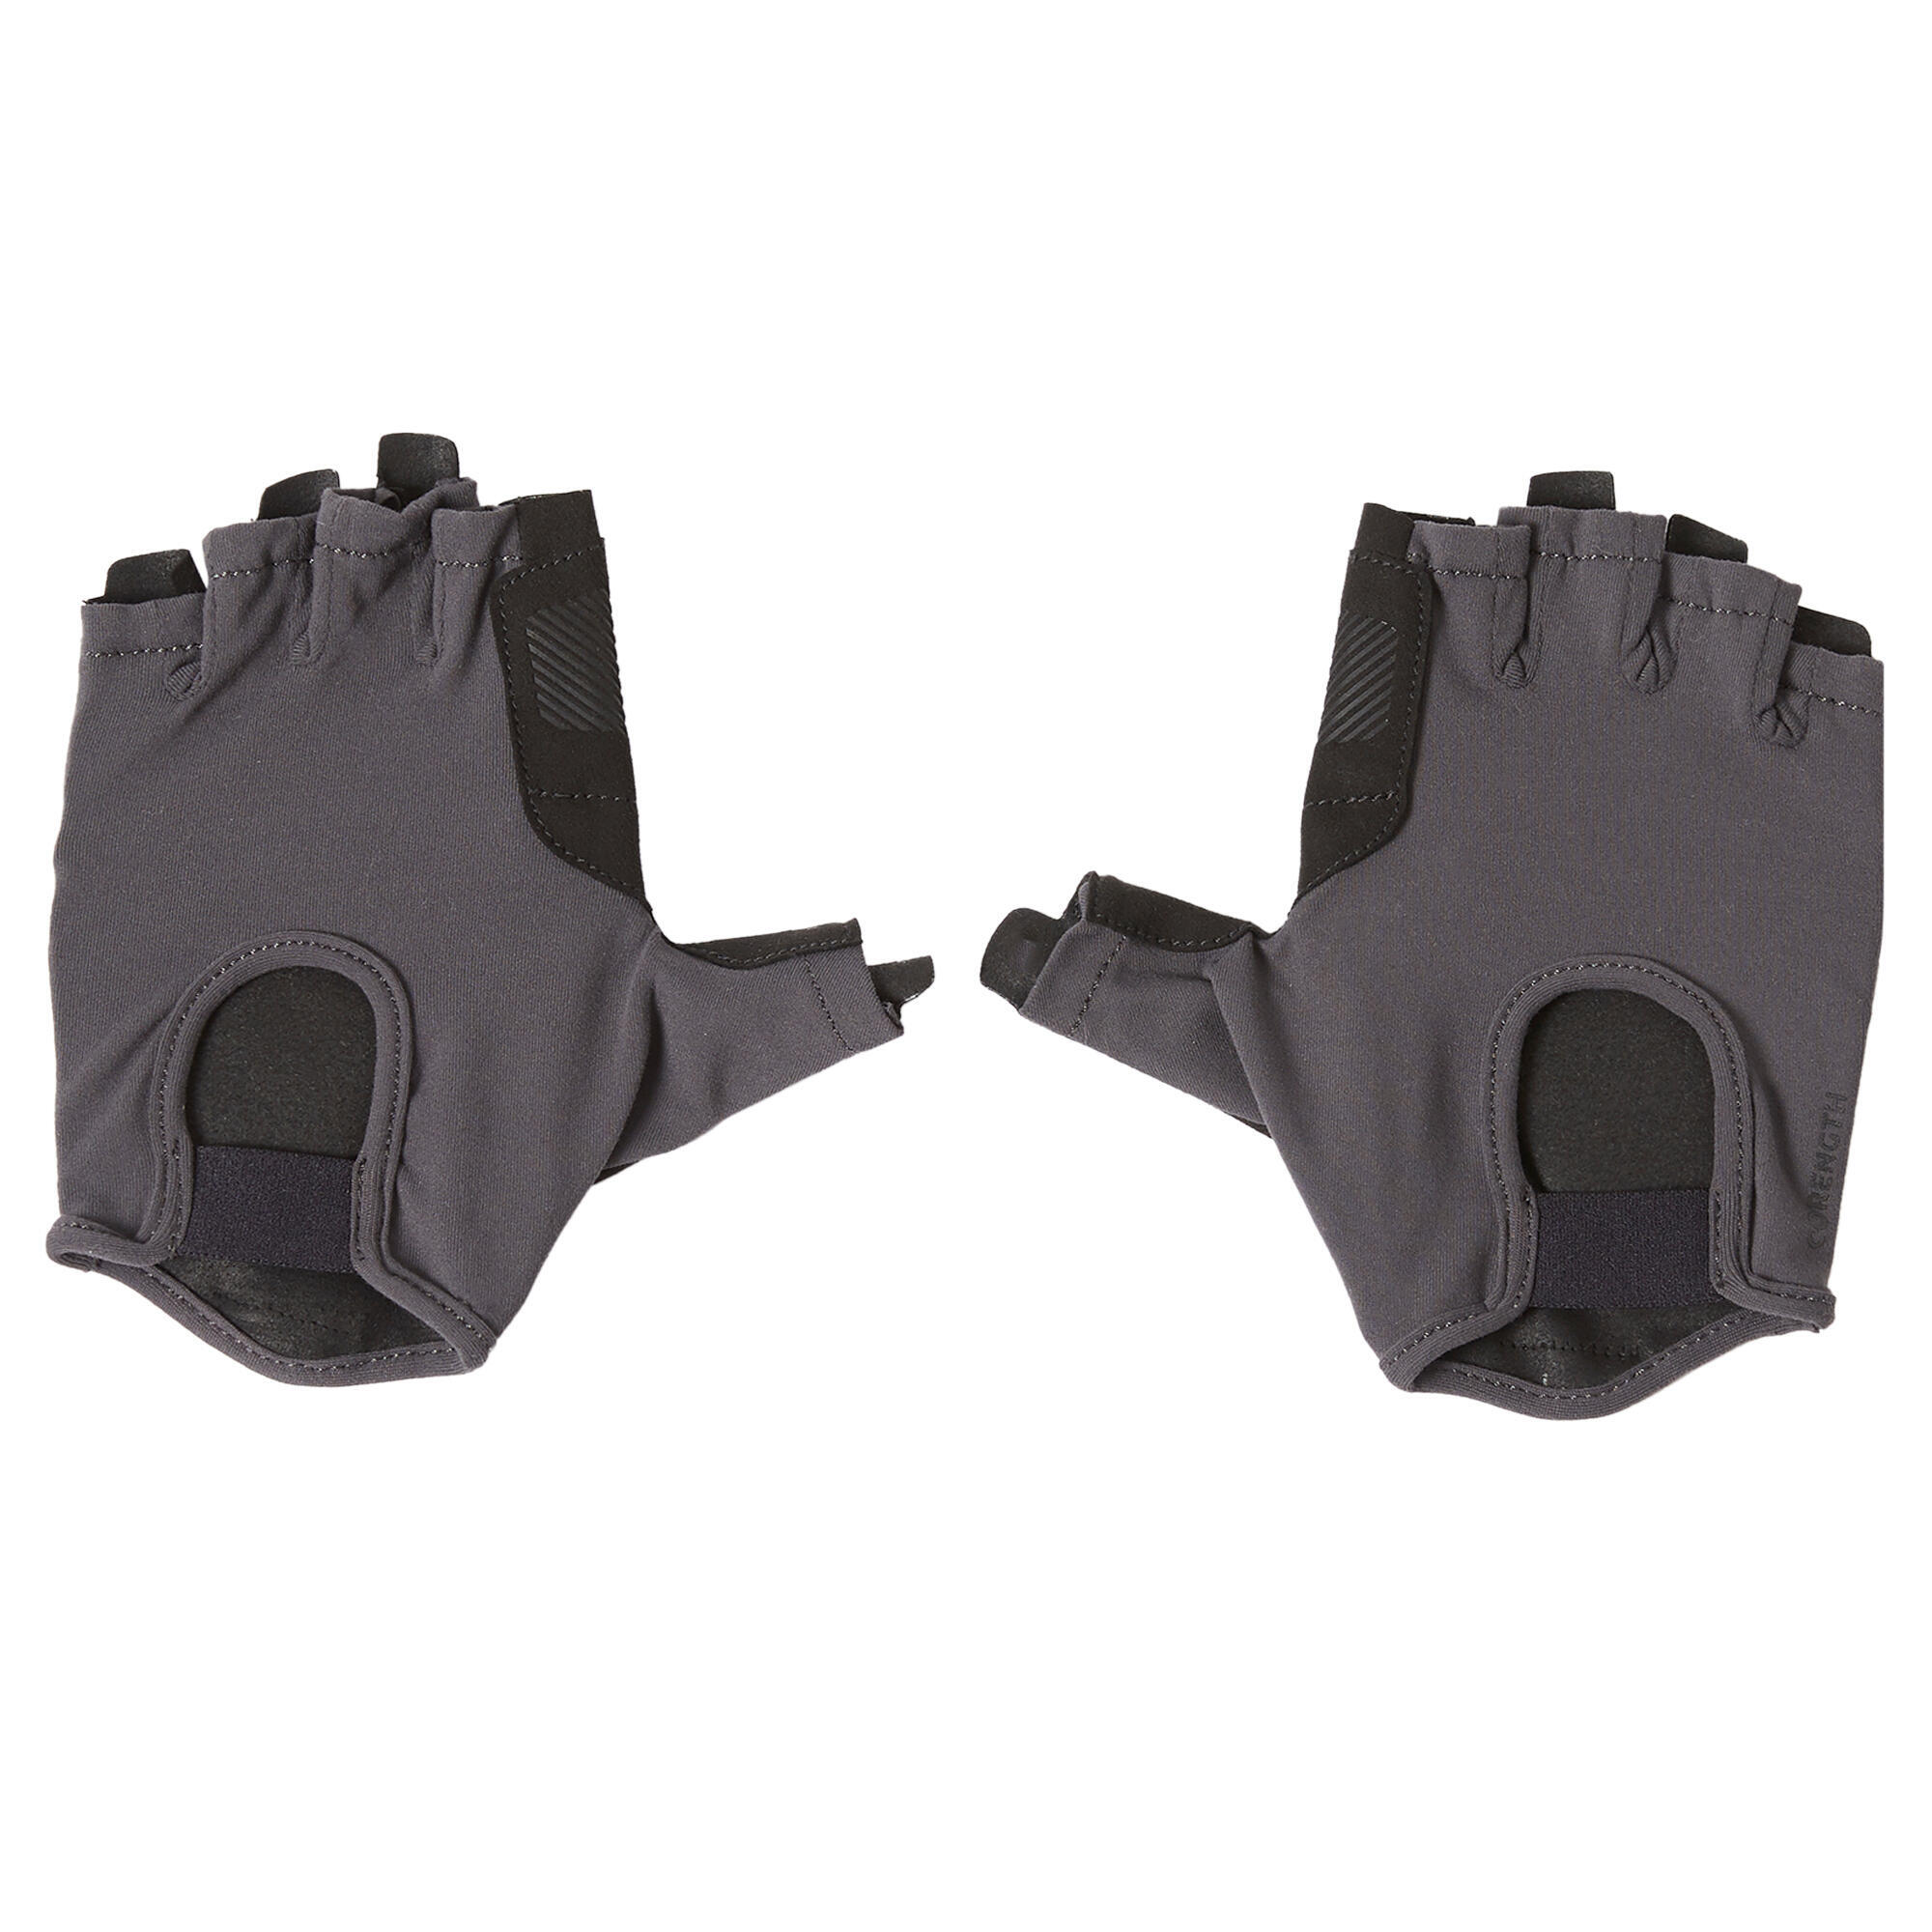 Women's Breathable Weight Training Gloves - Grey 1/3